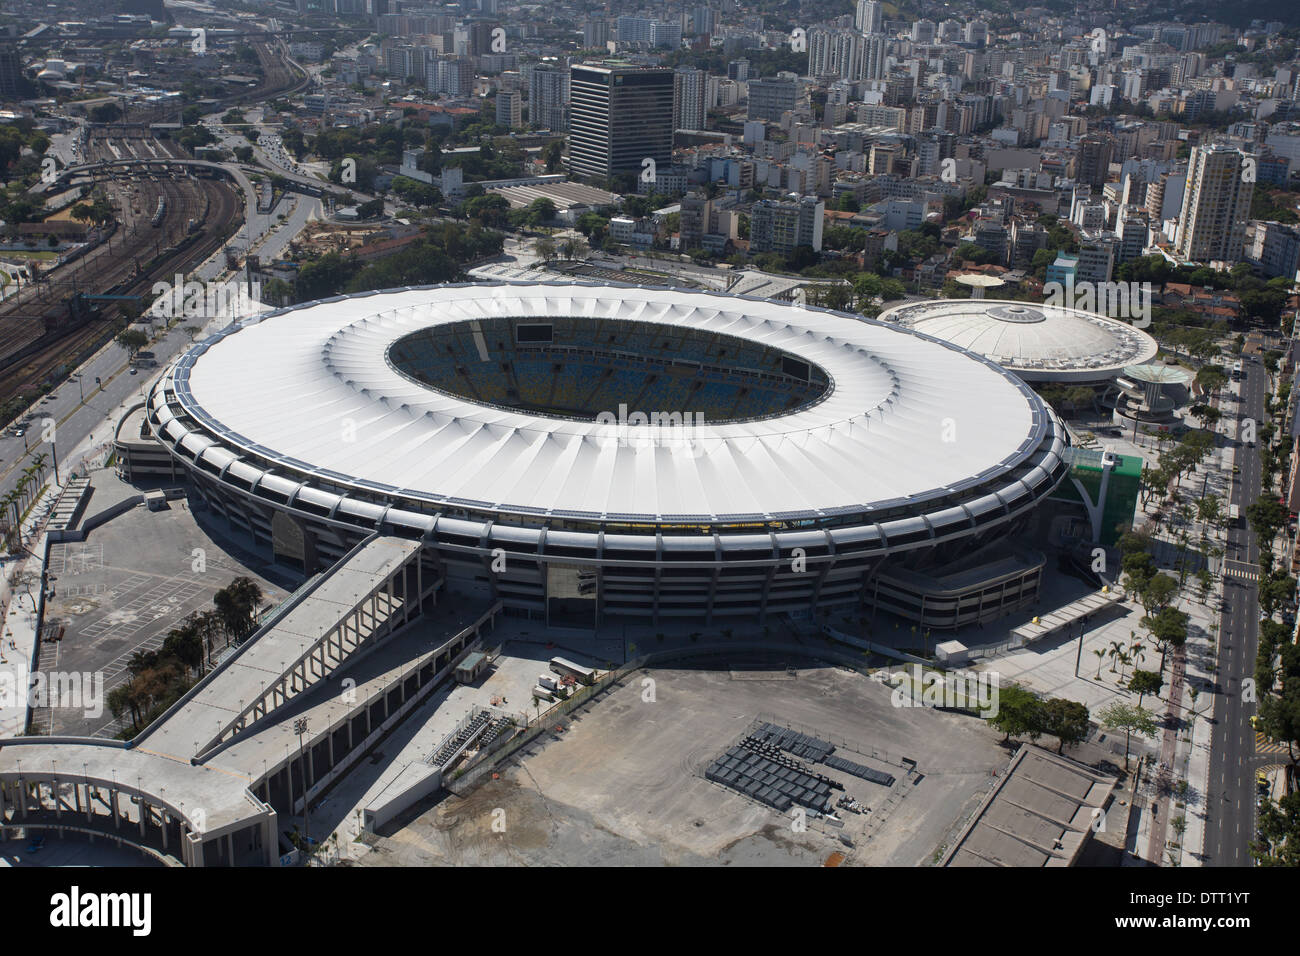 Aerial view of Maracana national stadium in Rio de Janeiro, which will host the World Cup final 2014 in Brazil Stock Photo